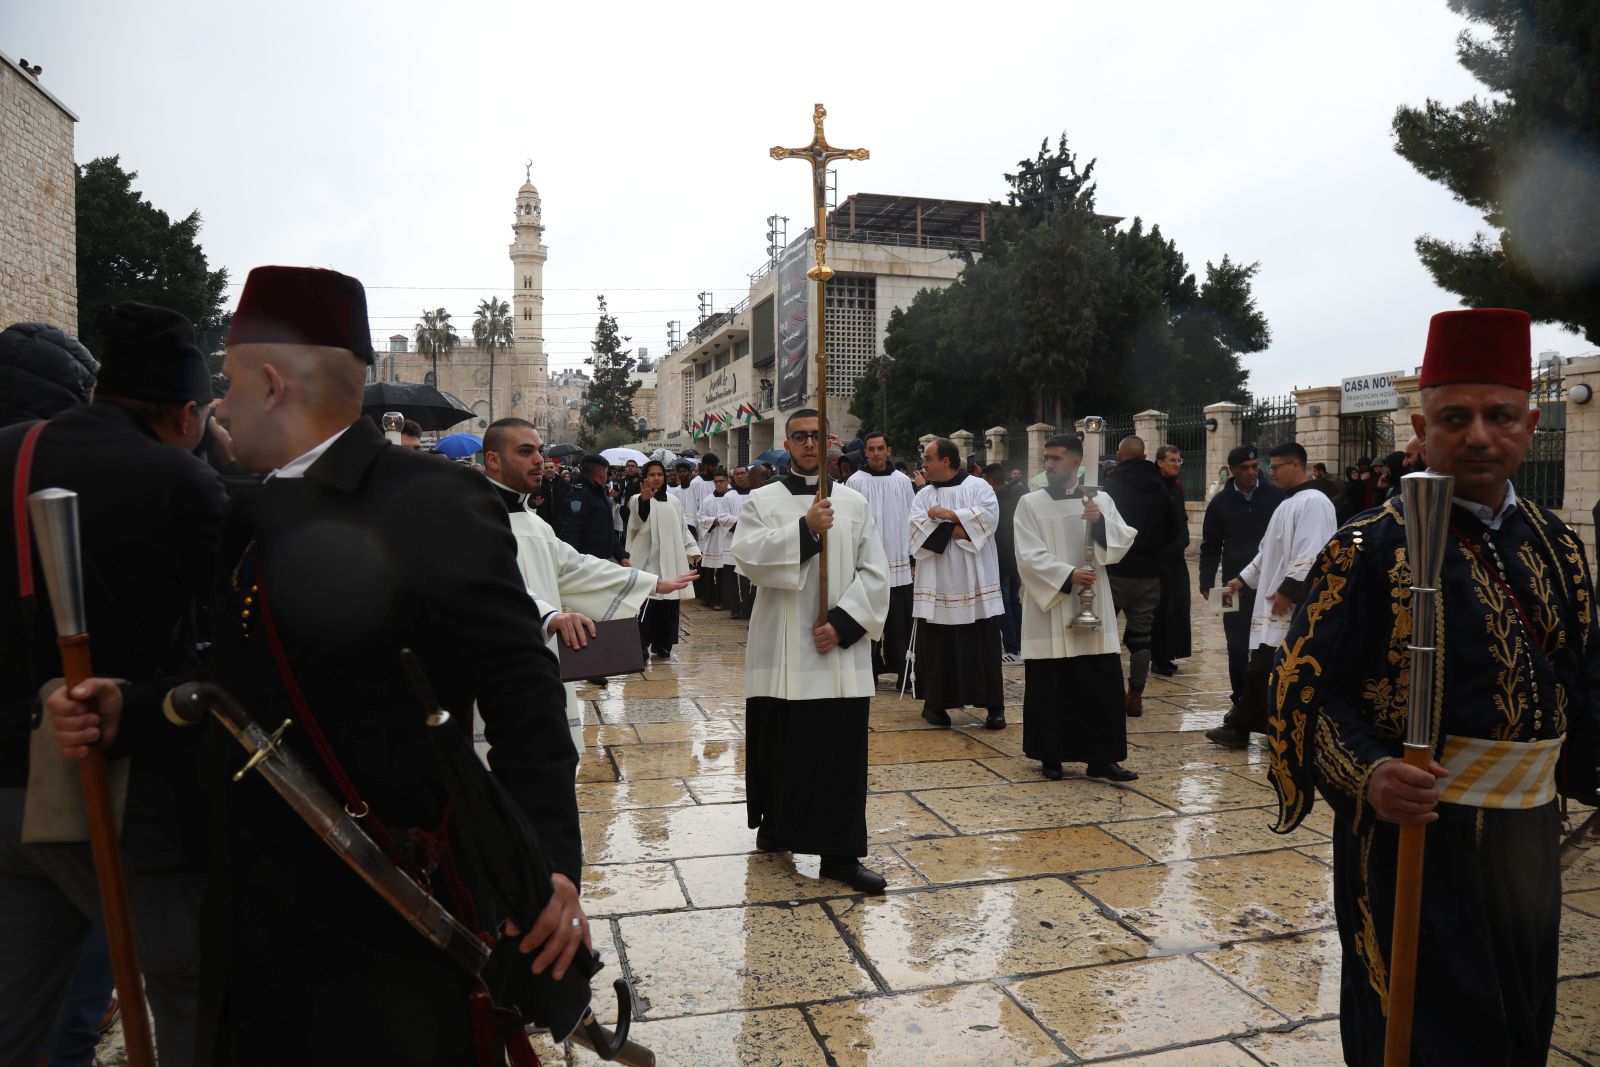 epa11042952 Catholic clergy walk in procession at Manger Square, leading to the Church of the Nativity,  in the West Bank town of Bethlehem, 24 December 2023. Church leaders in the historical Christian town of Bethlehem, traditionally revered as the birthplace of Jesus, have announced the cancelation of public Christmas celebrations this year in solidarity with the people of Gaza amid the ongoing Israel-Gaza conflict. Christmas activities will be limited to worship and prayer, without the usual Christmas lights and tree.  EPA/Wisam Hashlamoun